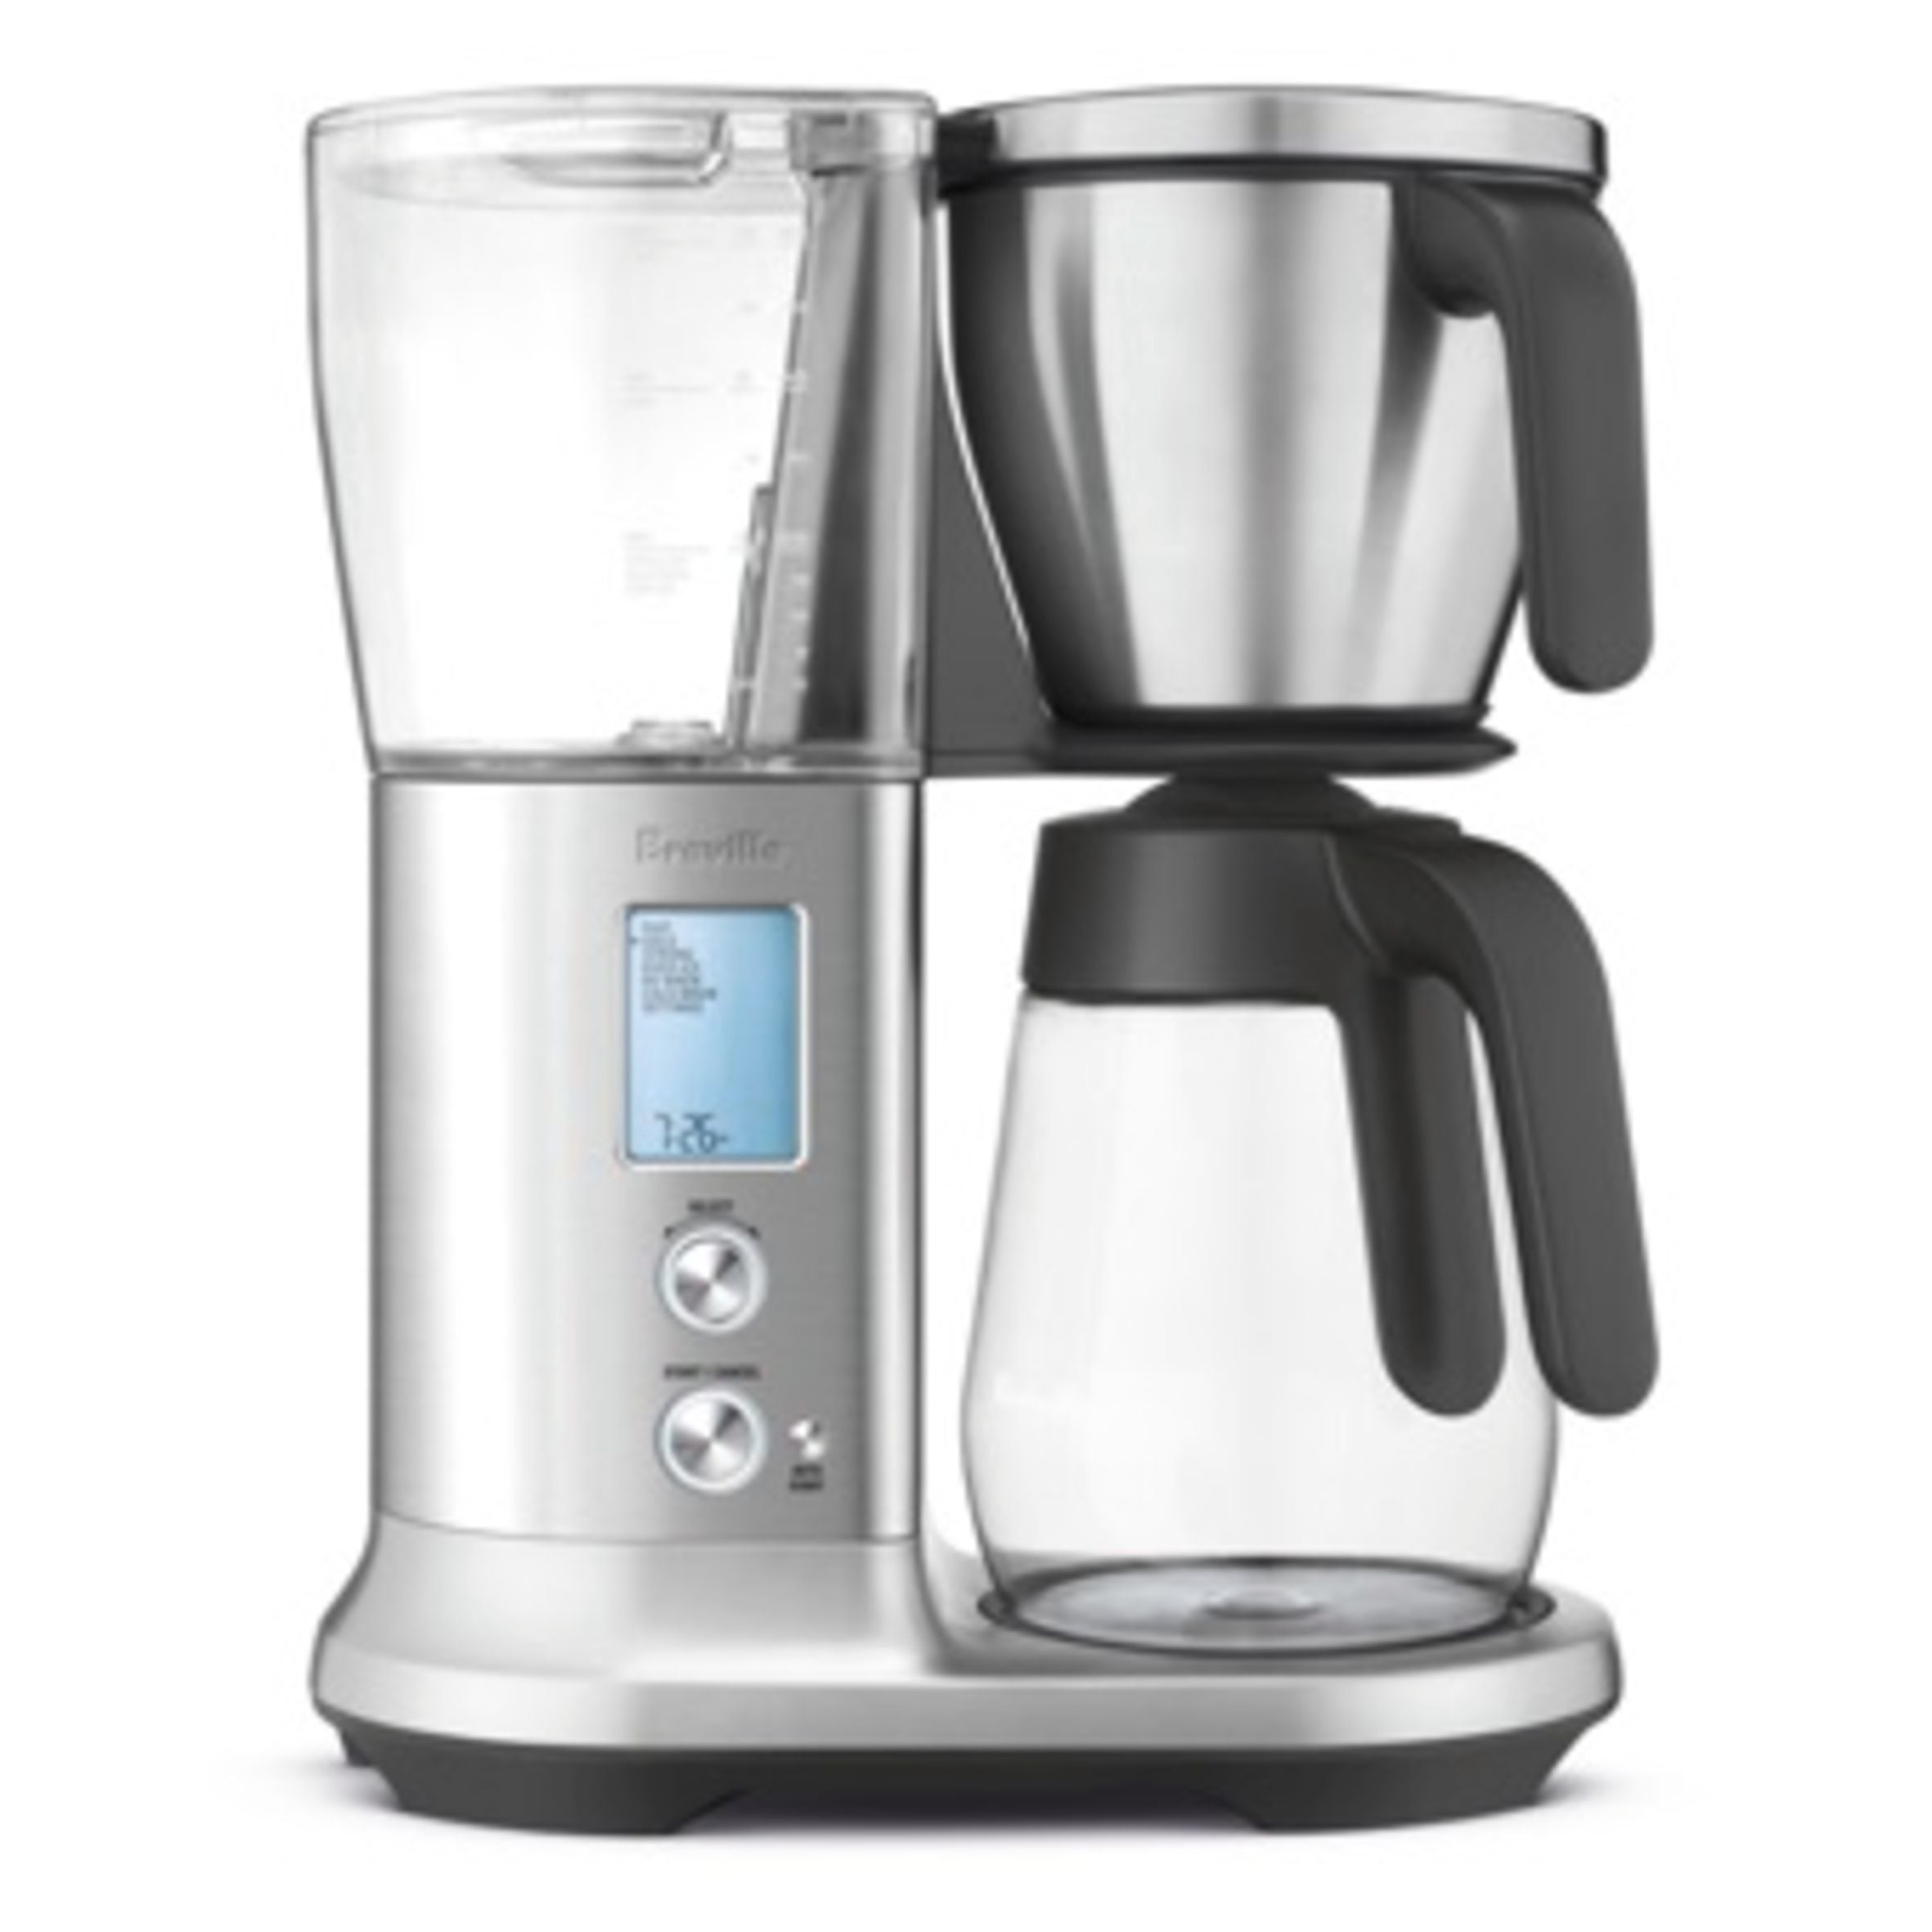 Breville Precision Brewer drip coffee maker with glass carafe and warming plate